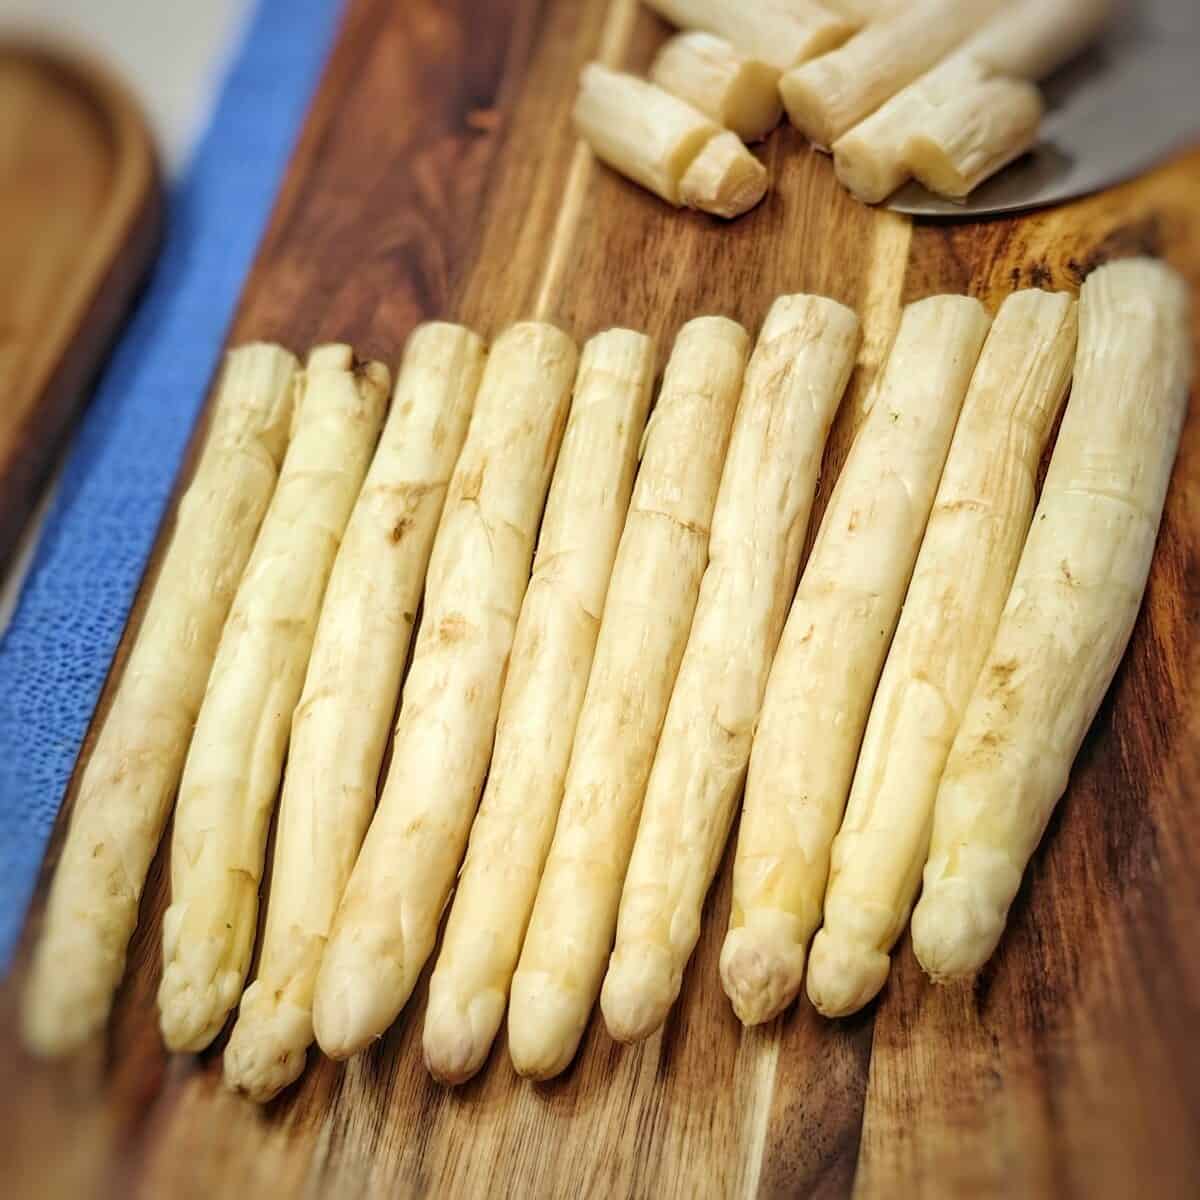 white asparagus with ends cut